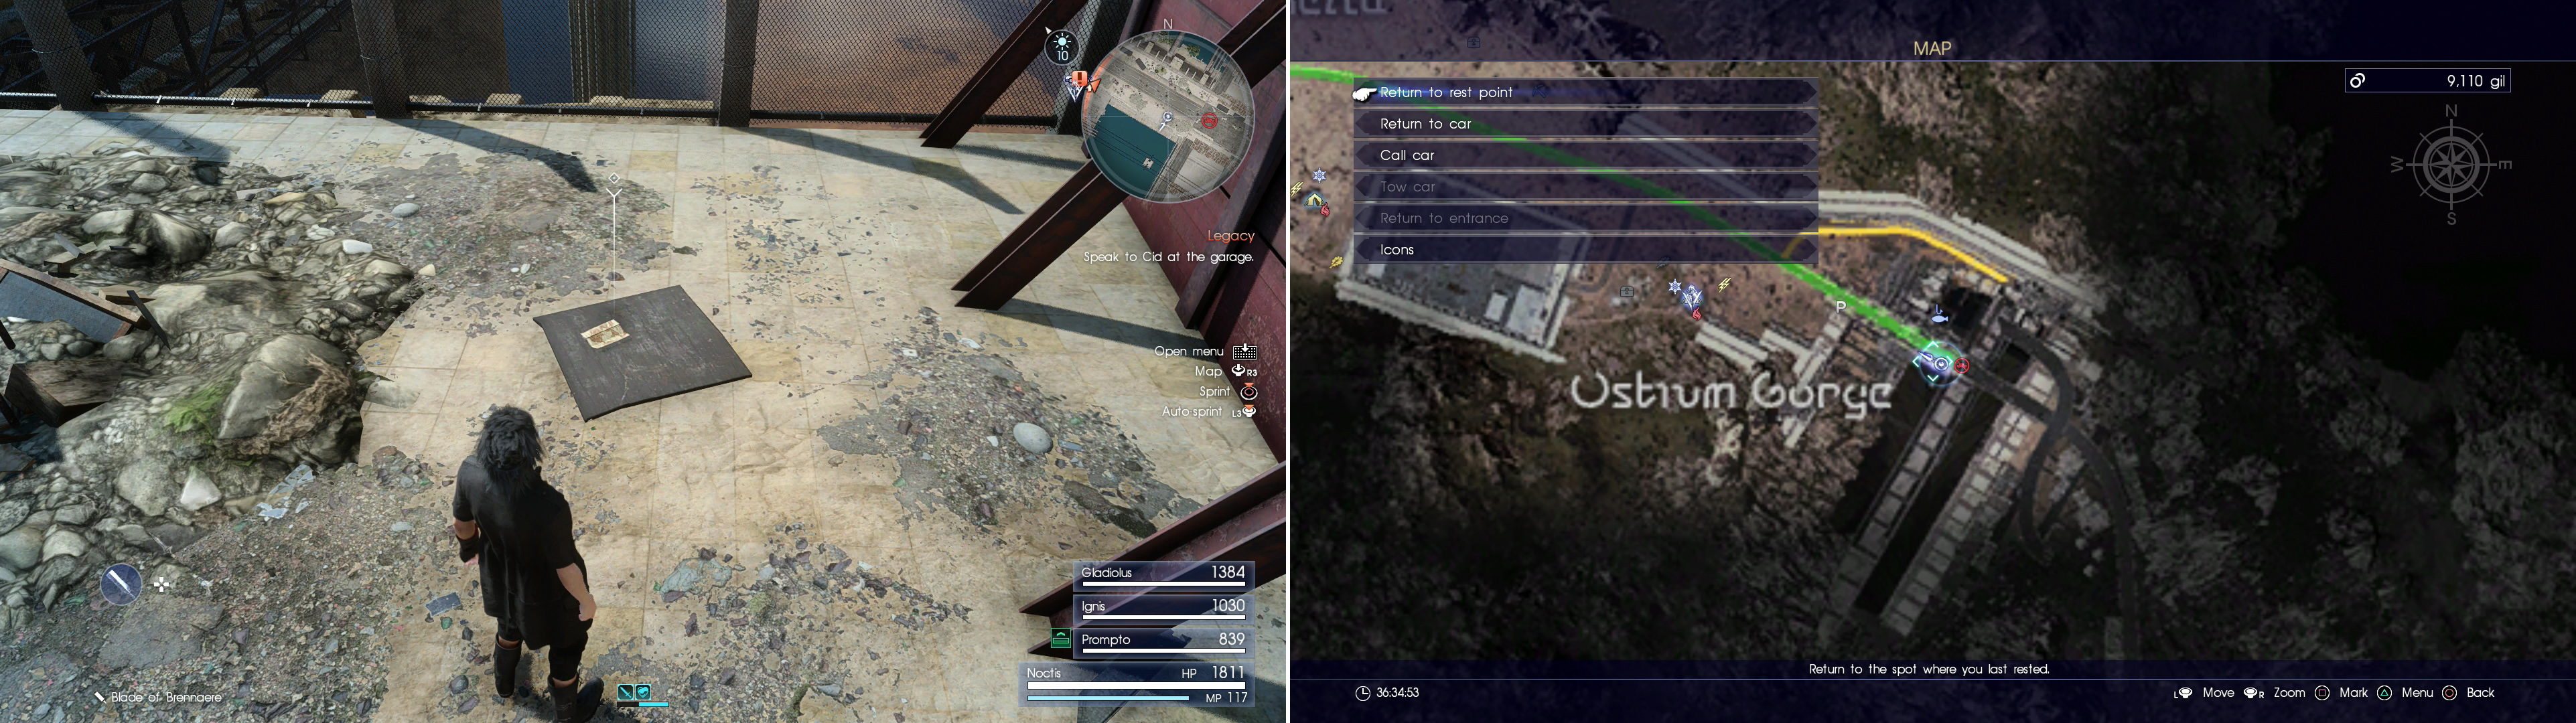 Find Mystery Map IV (left) at the marked location (right).